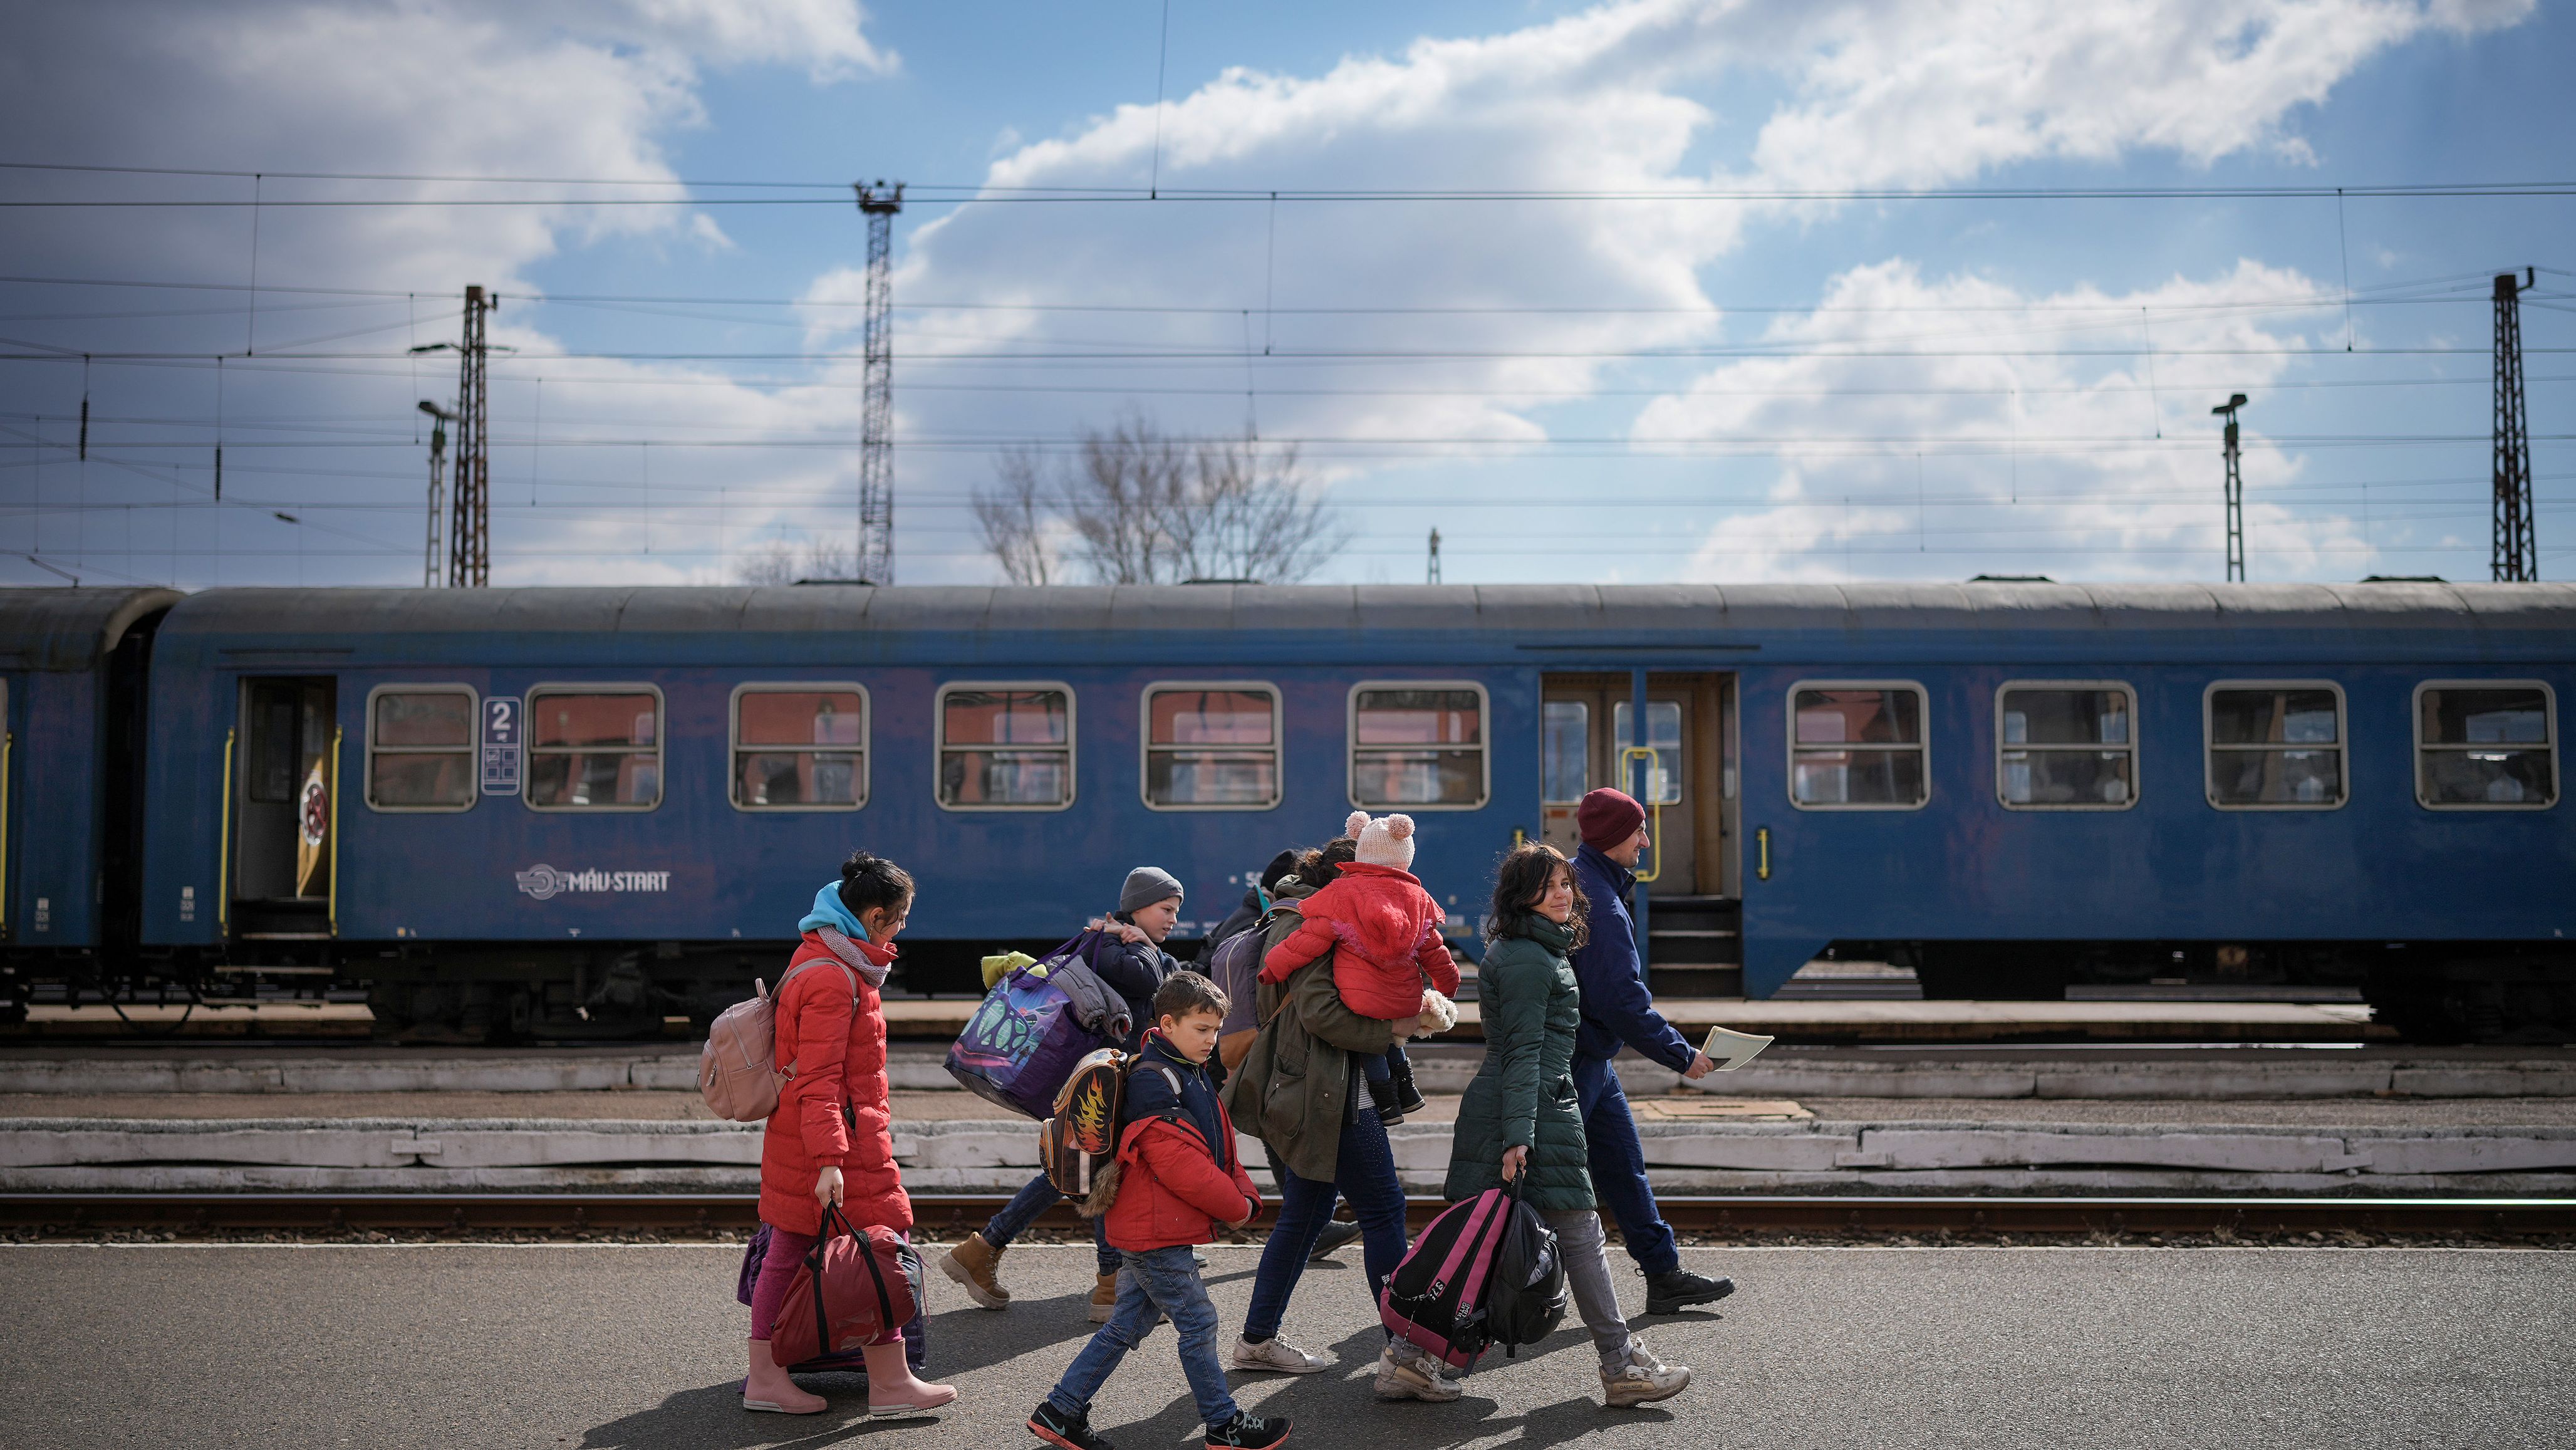 Refugees fleeing Ukraine arrive in Zahony, Hungary, on March 10. Millions of Ukrainians have fled their homes since Russia invaded in late February.